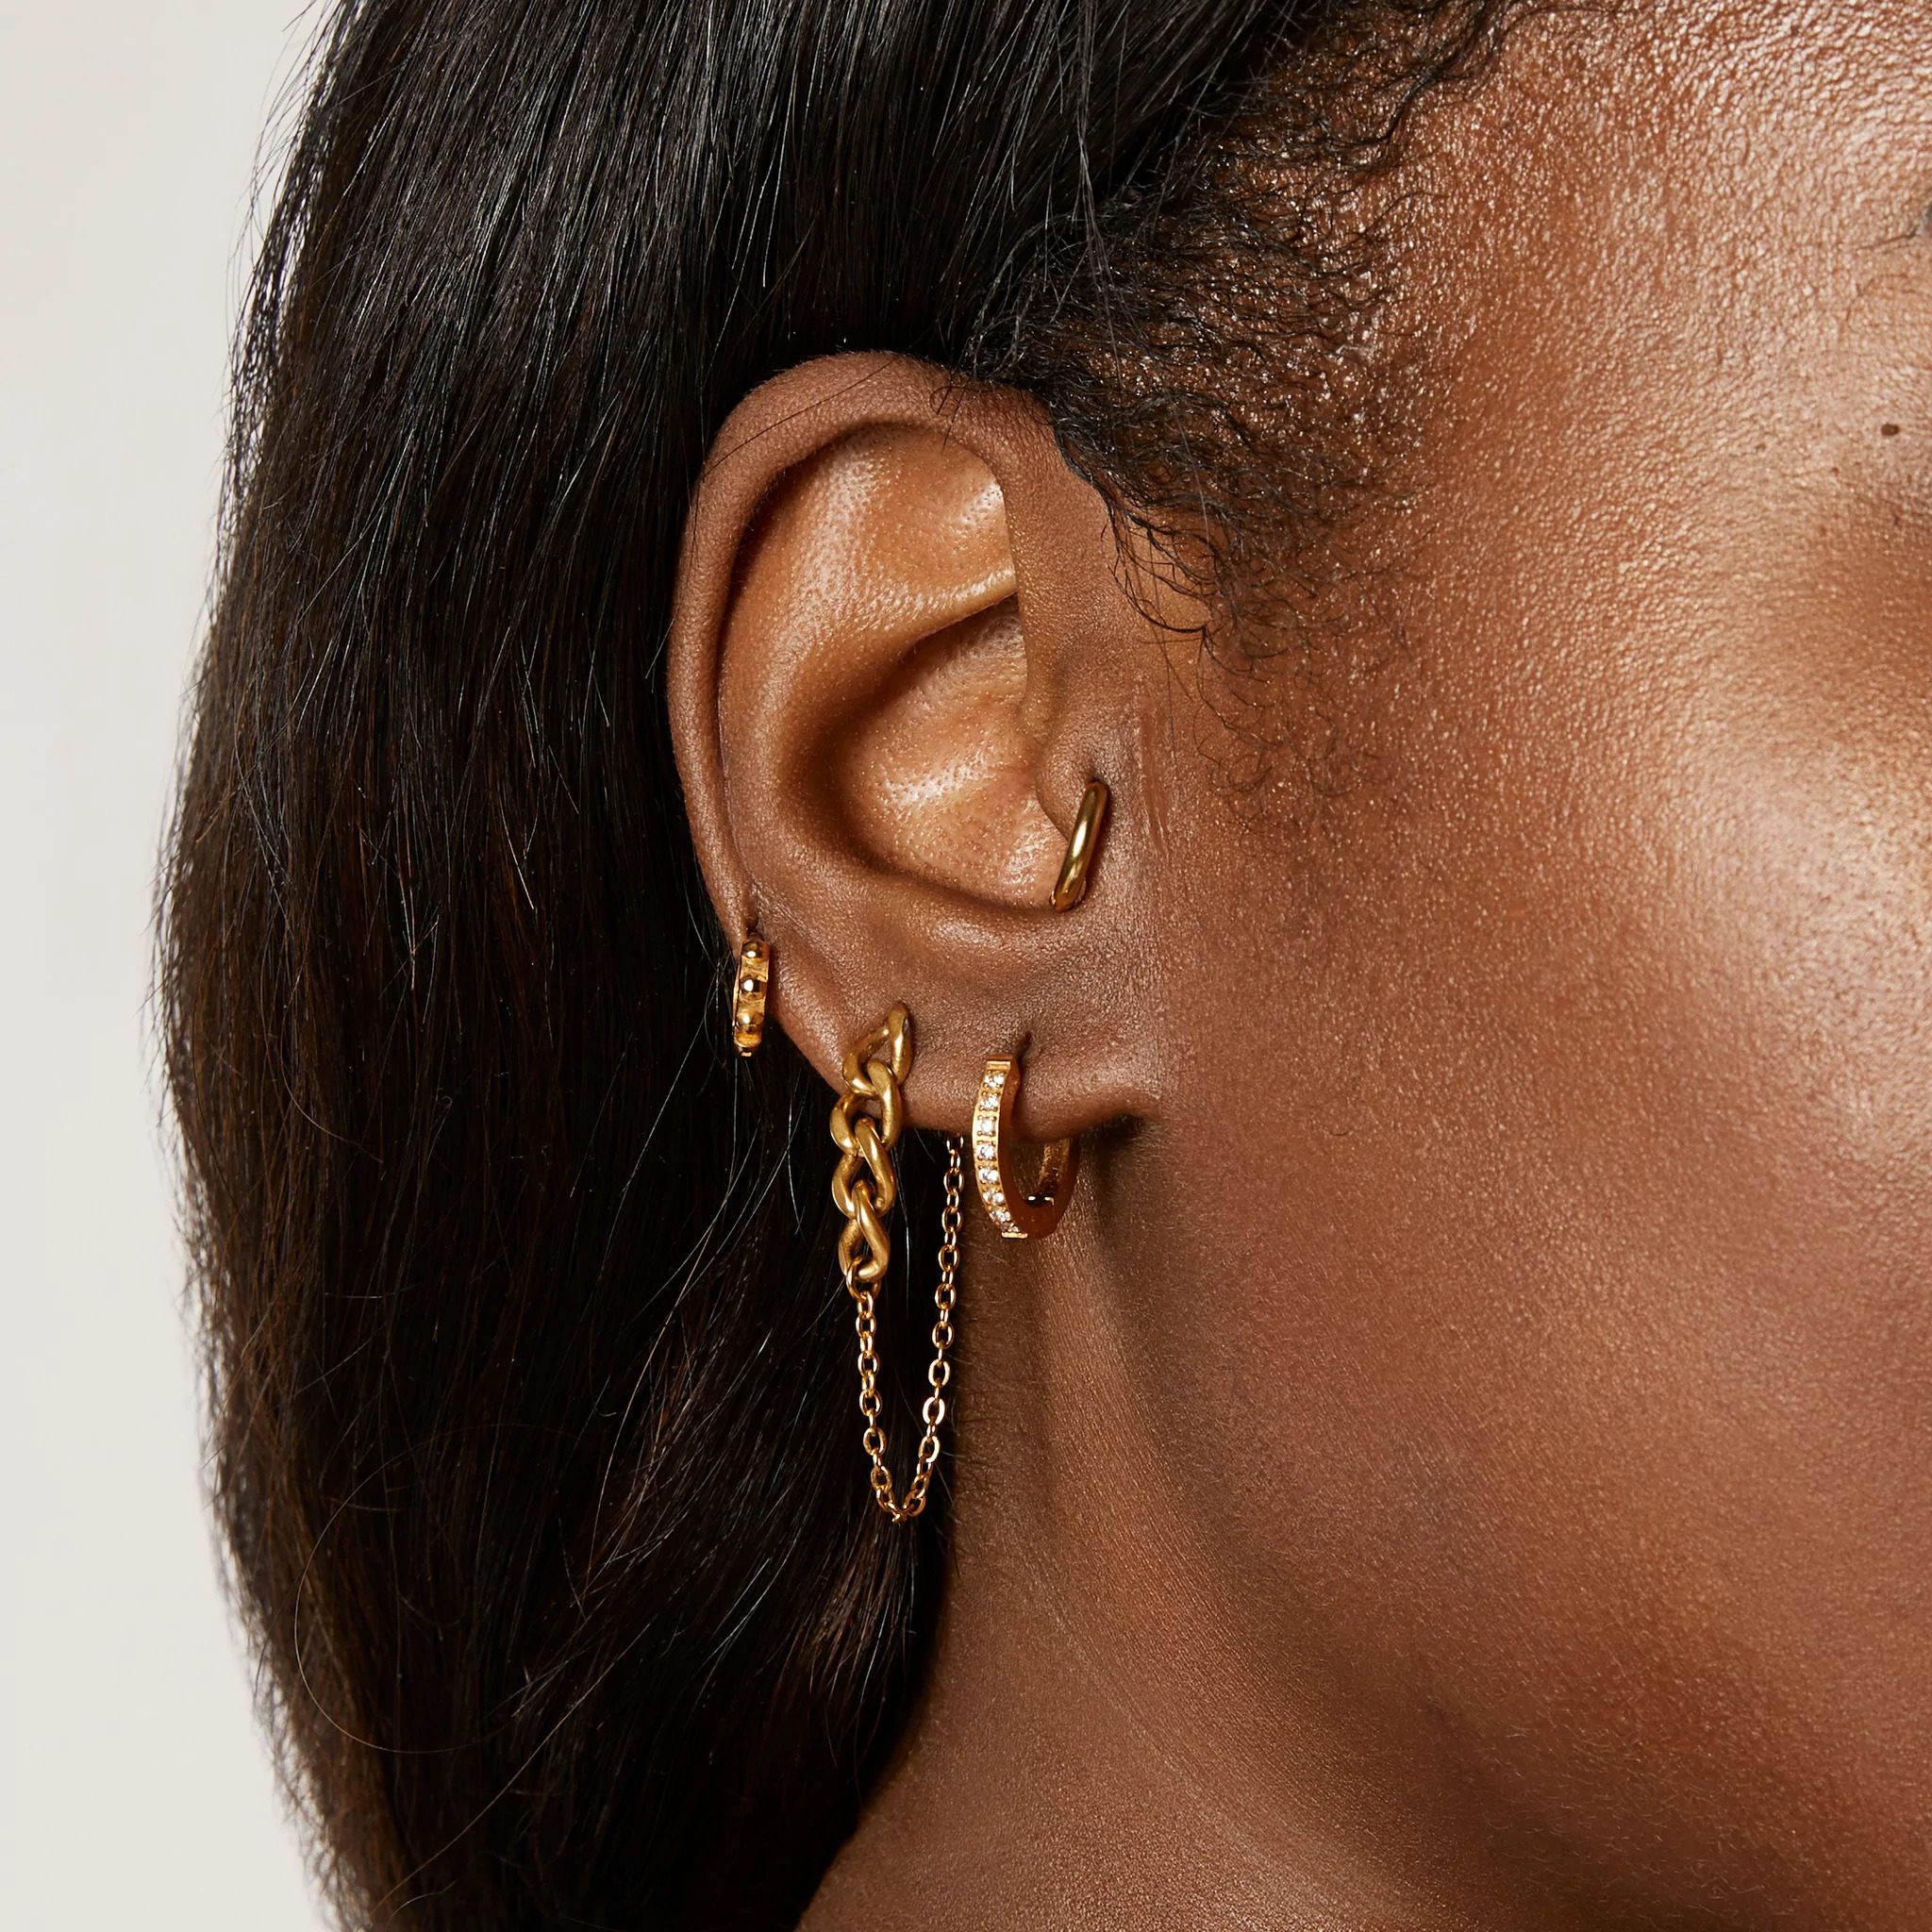 The Best Earrings for Sensitive Ears, According to a Dermatologist